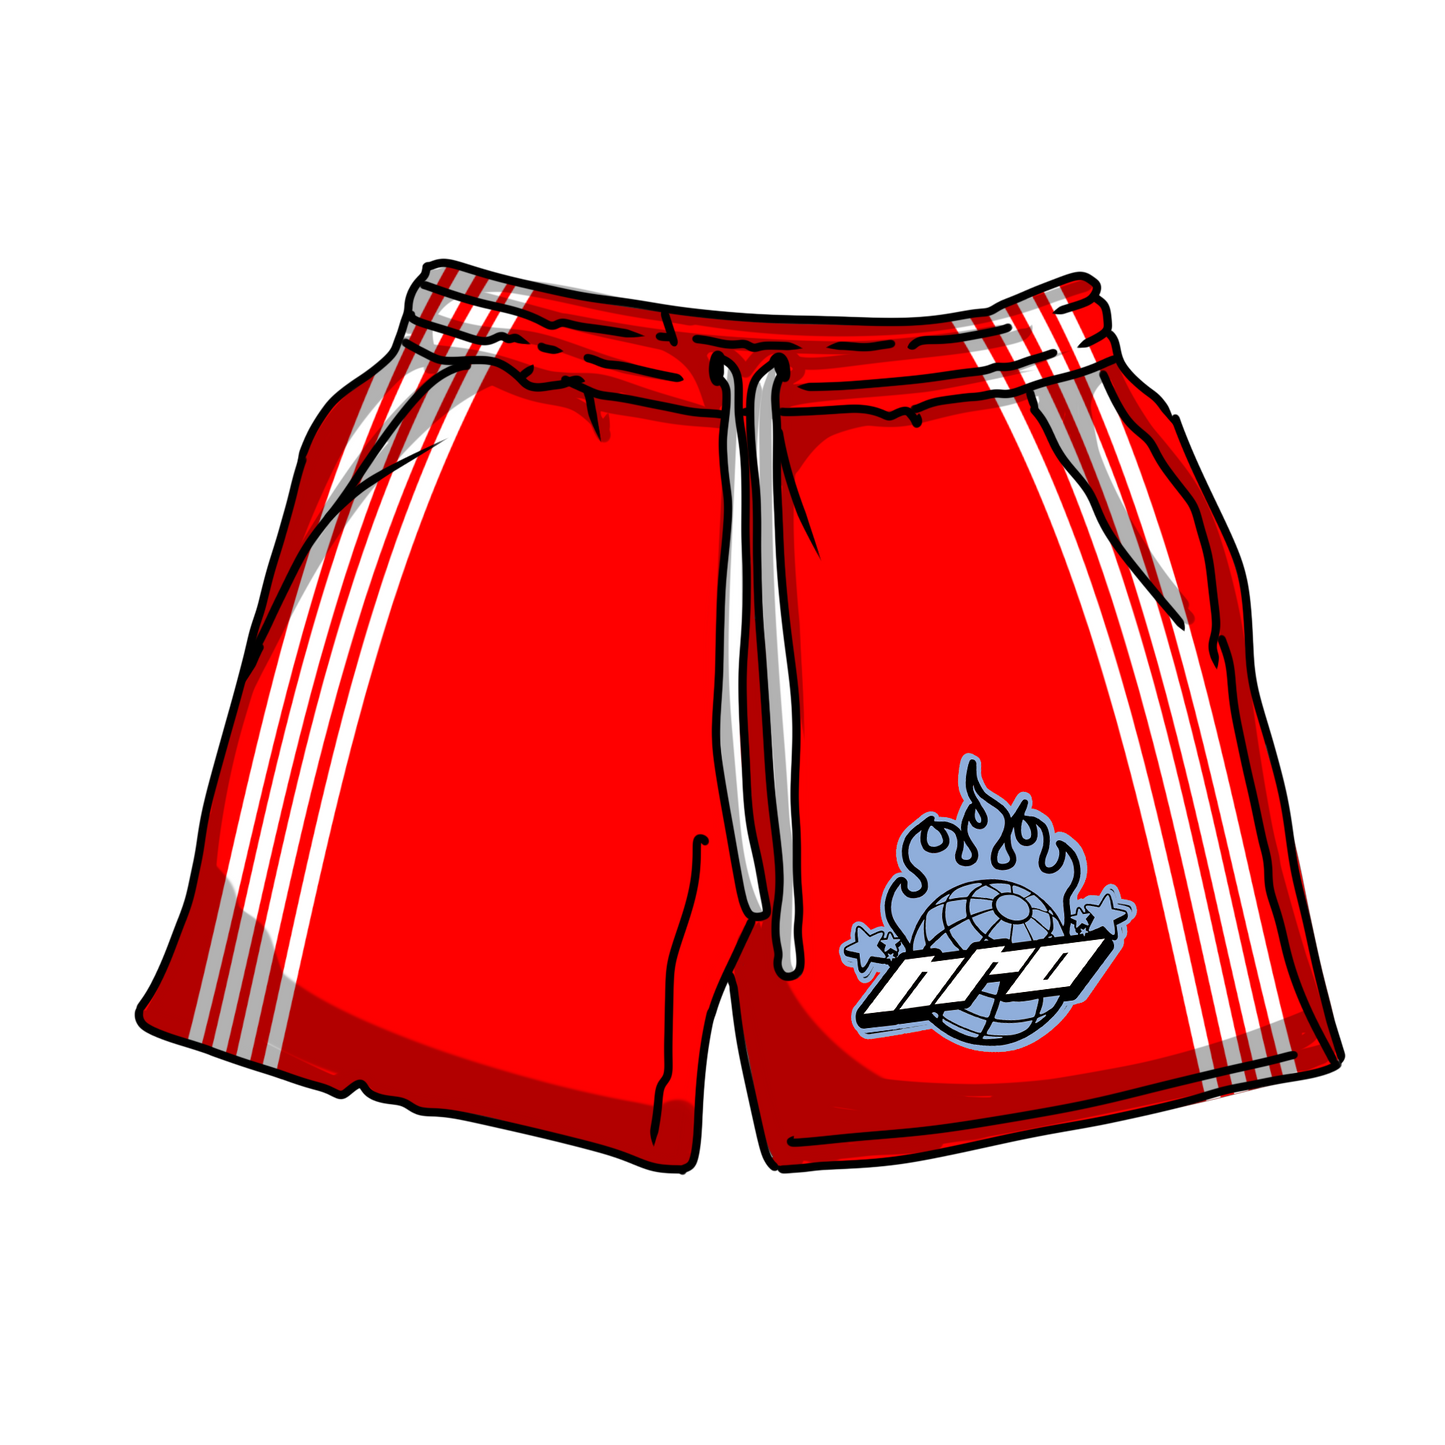 NRO RED SHORTS